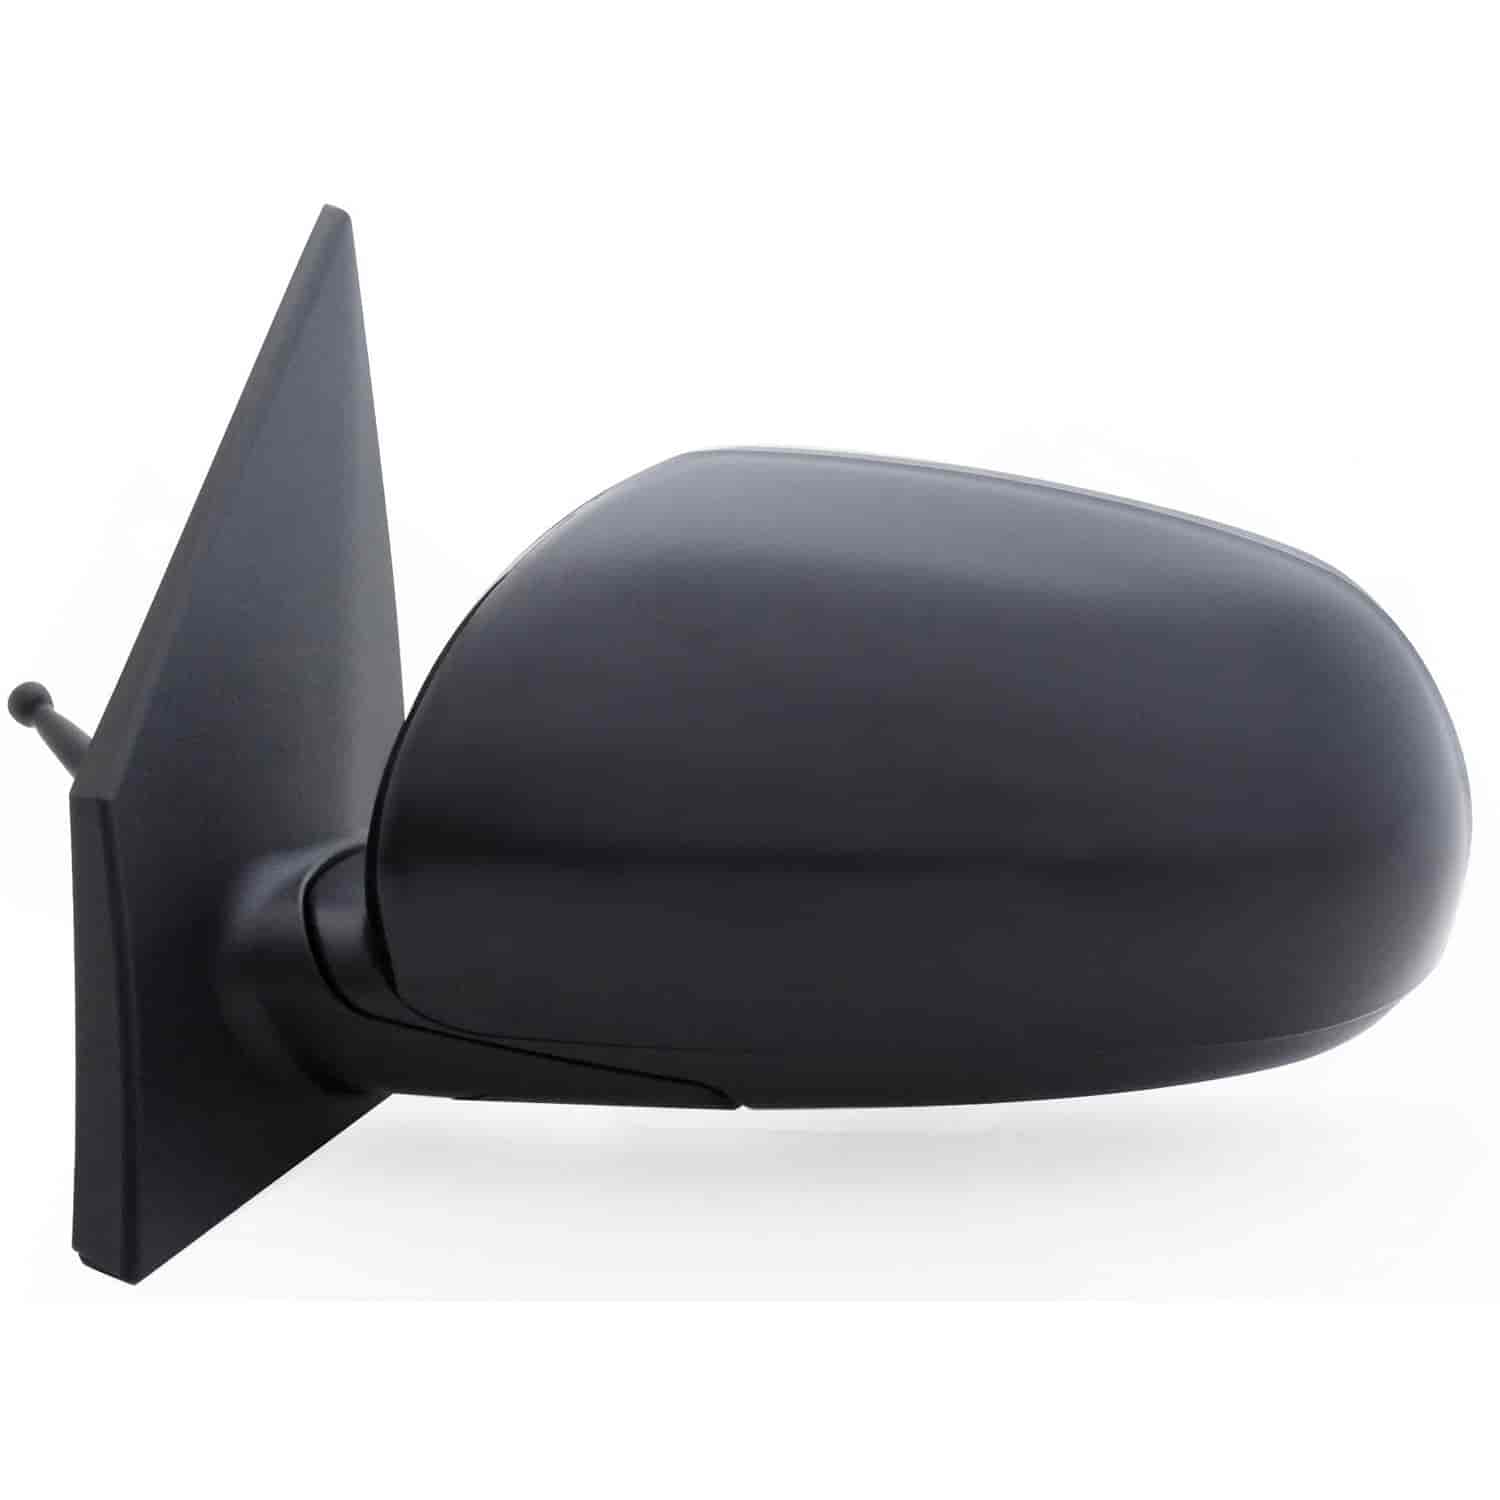 OEM Style Replacement mirror for 10-11 Kia Rio 5/ Rio Sedan driver side mirror tested to fit and fun